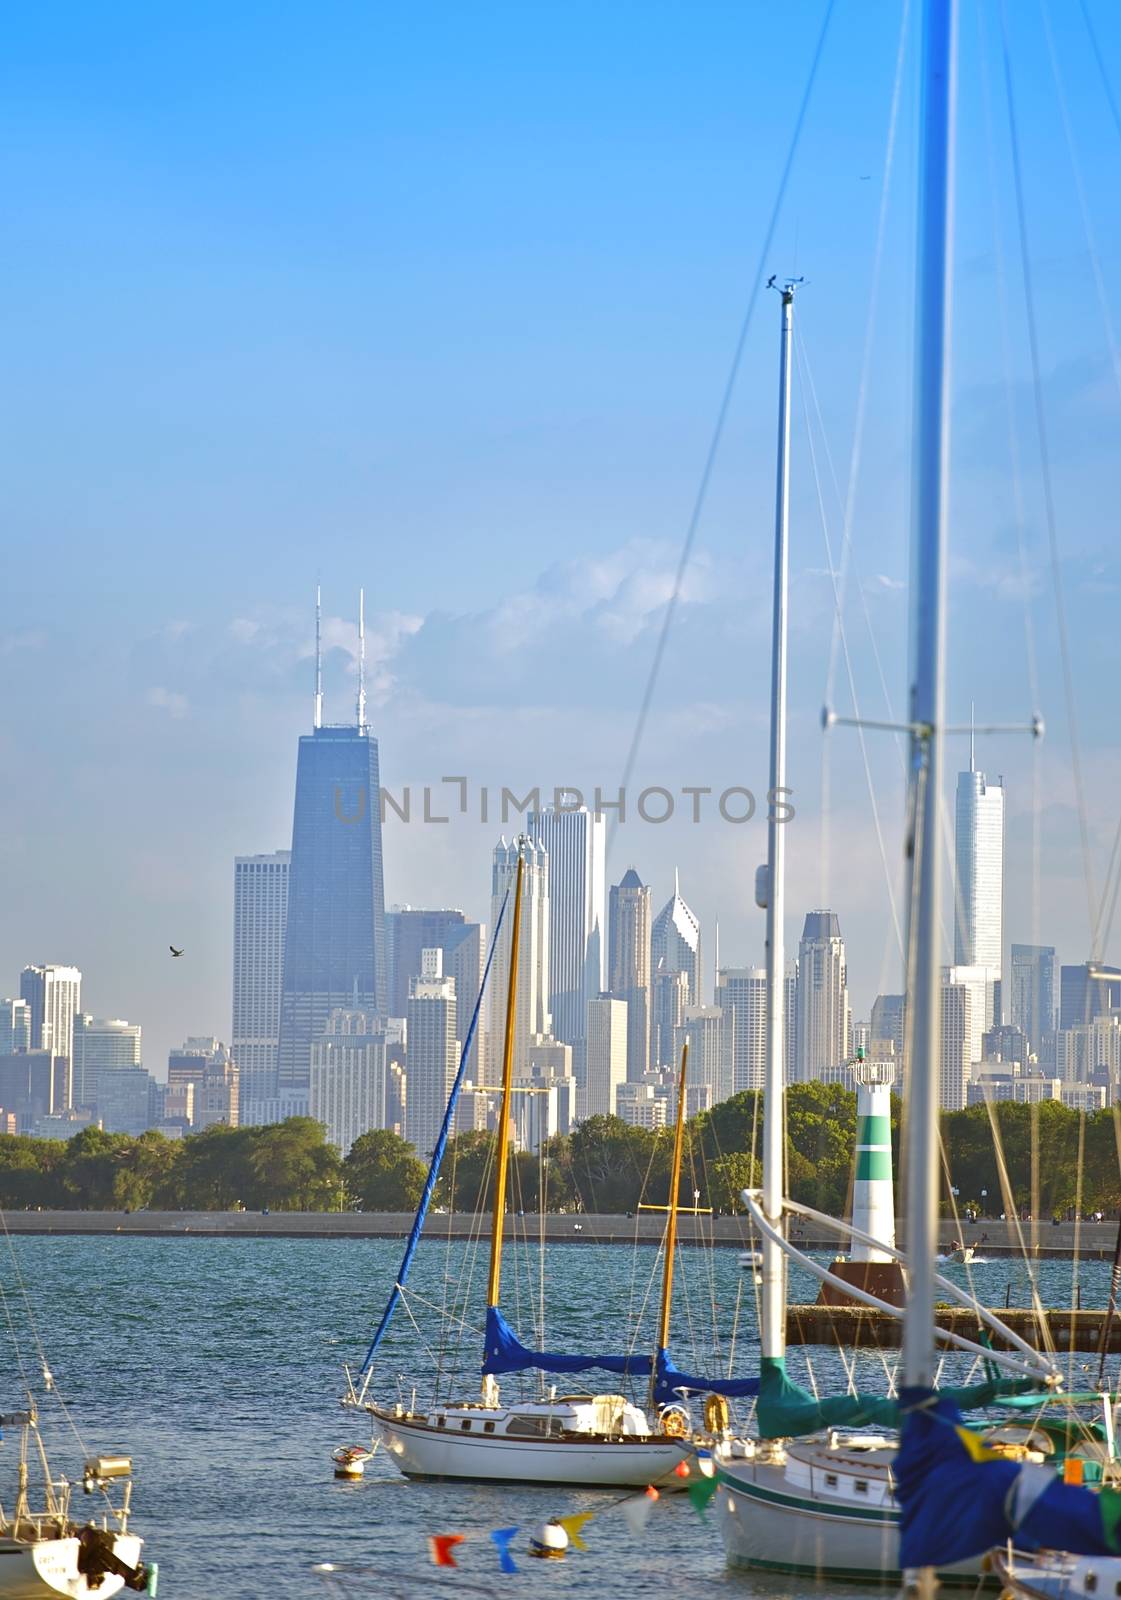 Lake Michigan, Boats and Chicago Skyline in the Background. Lake Michigan - Chicago, Illinois, U.S.A. Vertical Photo.